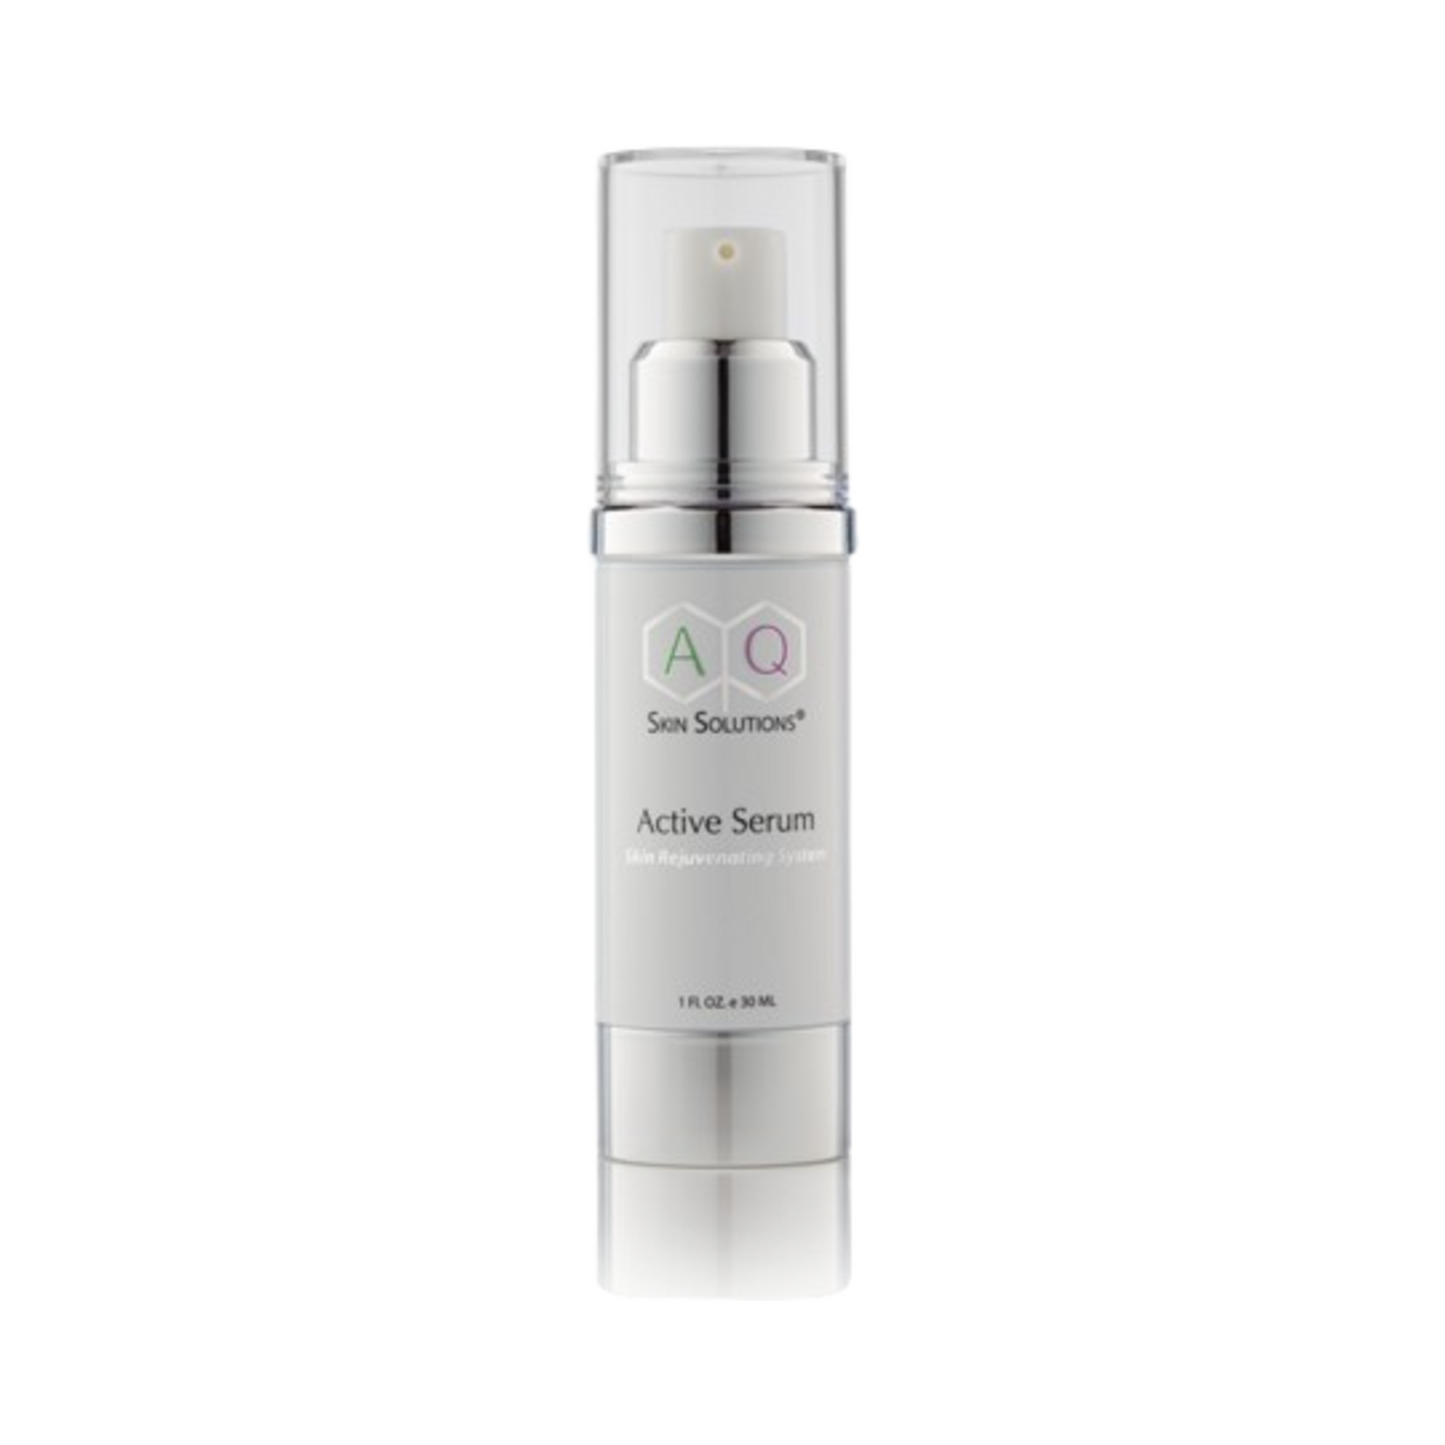 AQ Skin Solutions Active Serum - Daily Topical System